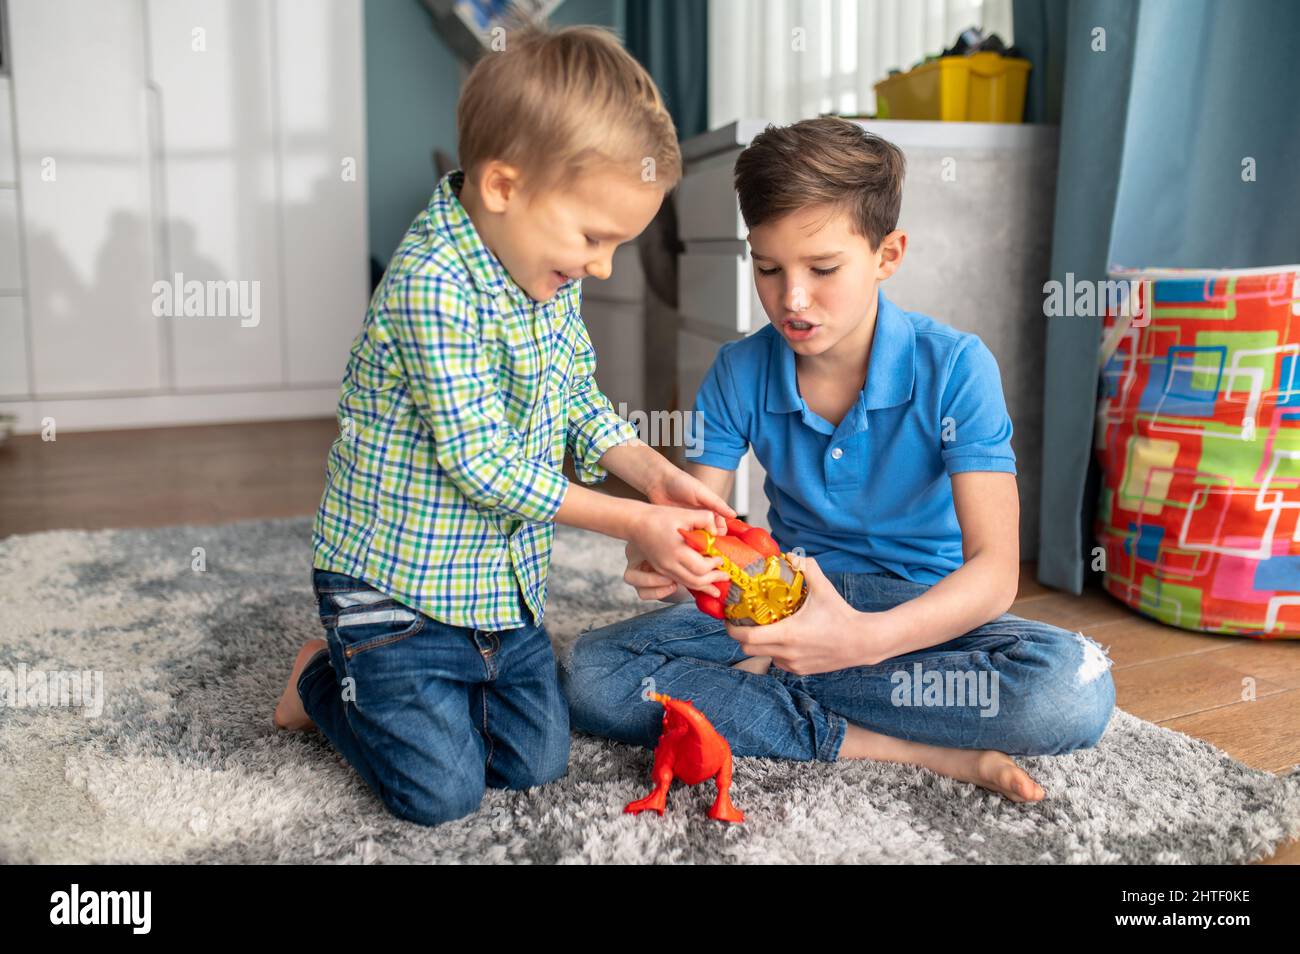 Two kids with rubber animal figures sitting in a room Stock Photo